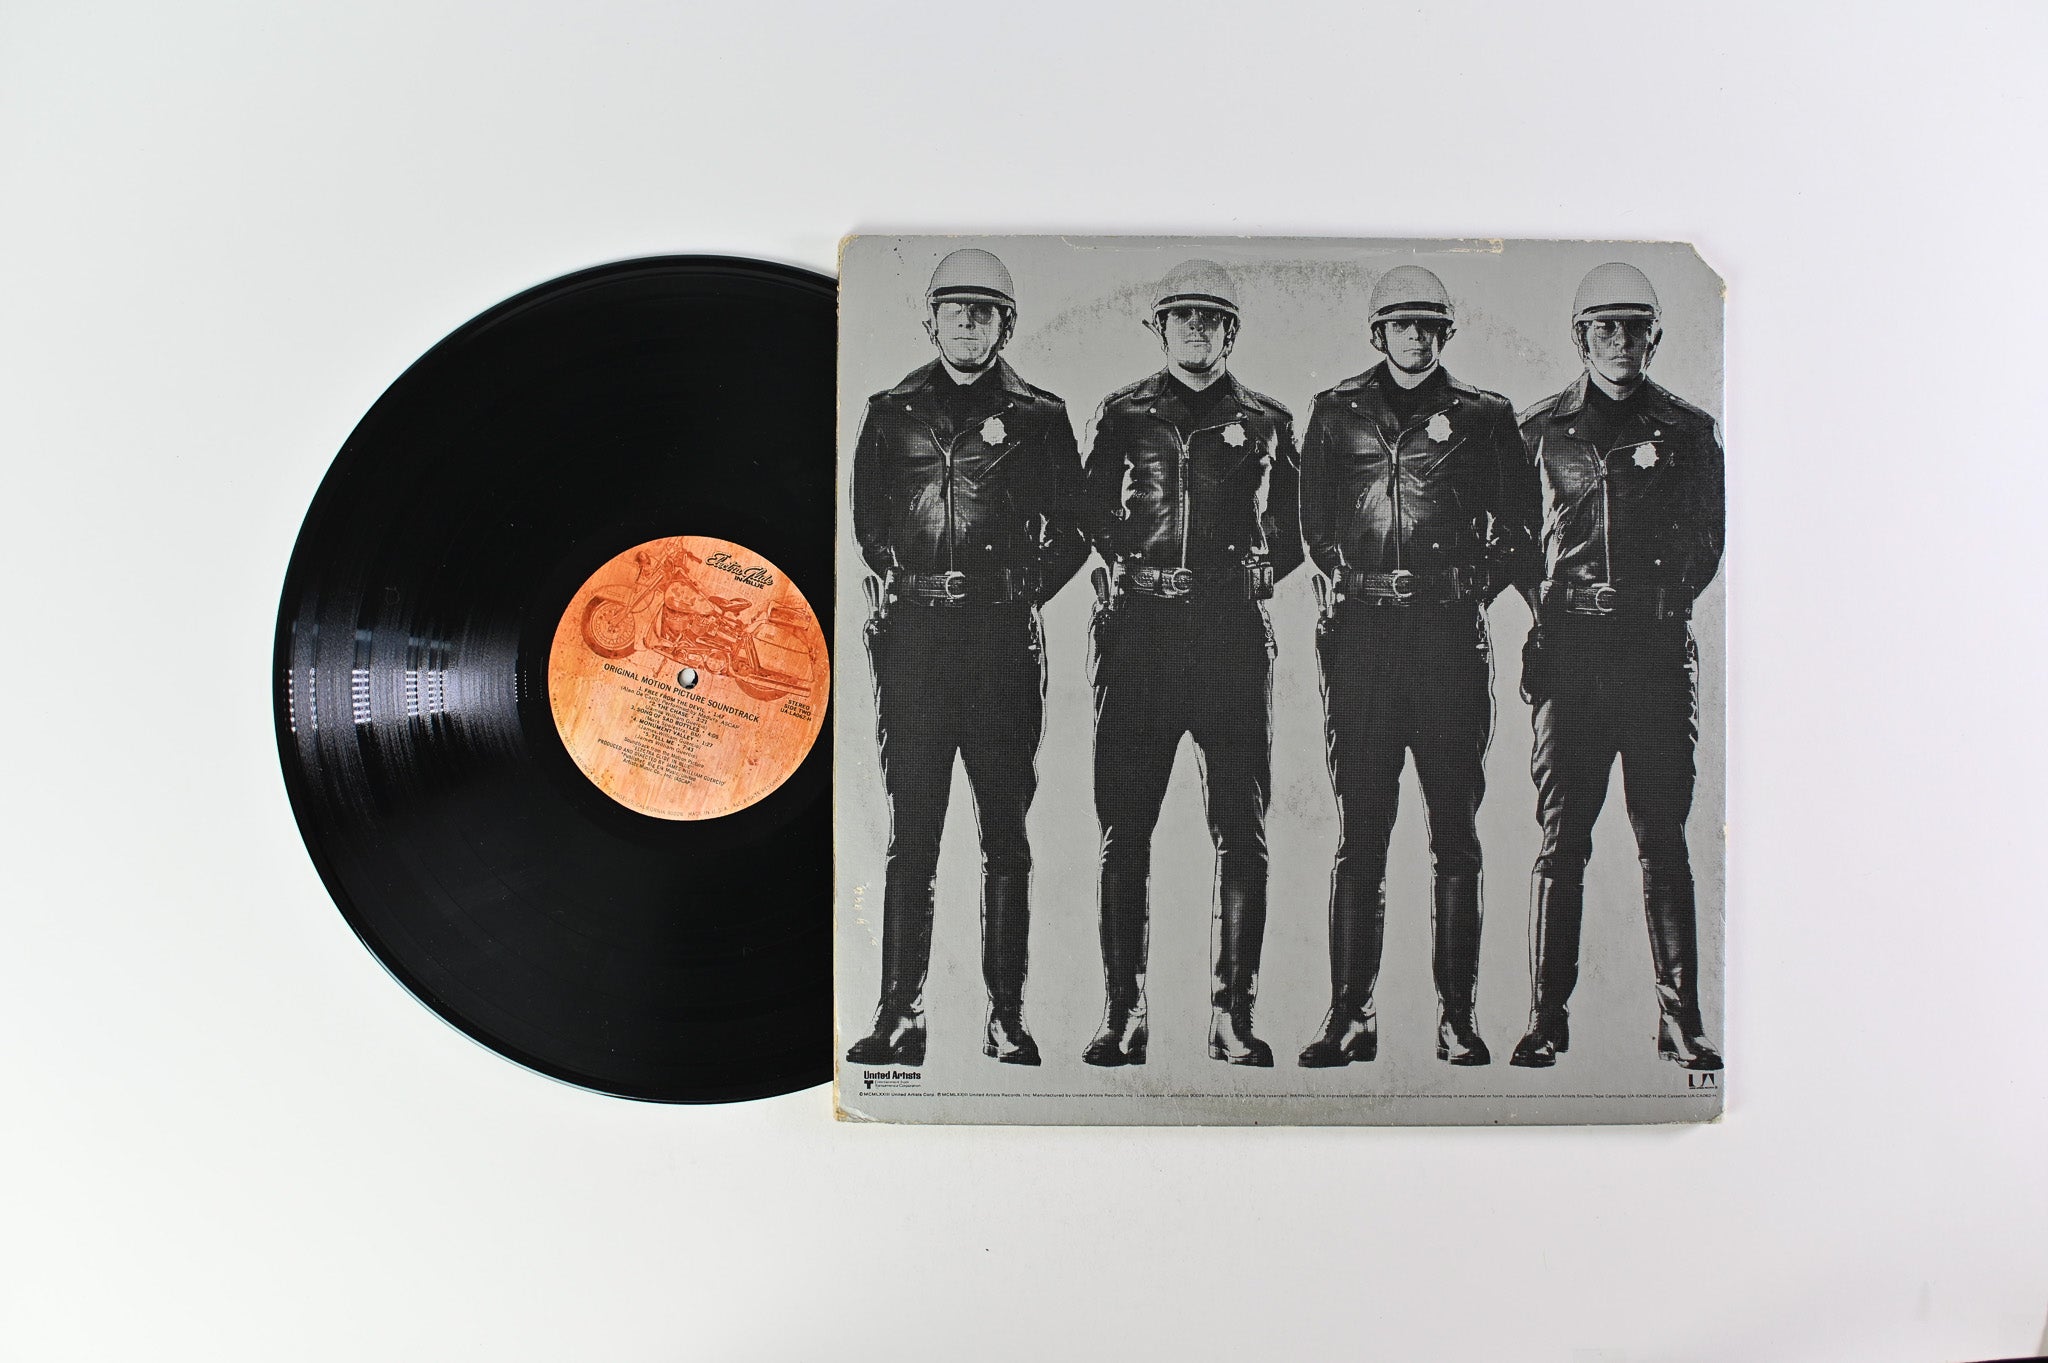 James William Guercio - Electra Glide In Blue (Original Motion Picture Soundtrack) on United Artists Records